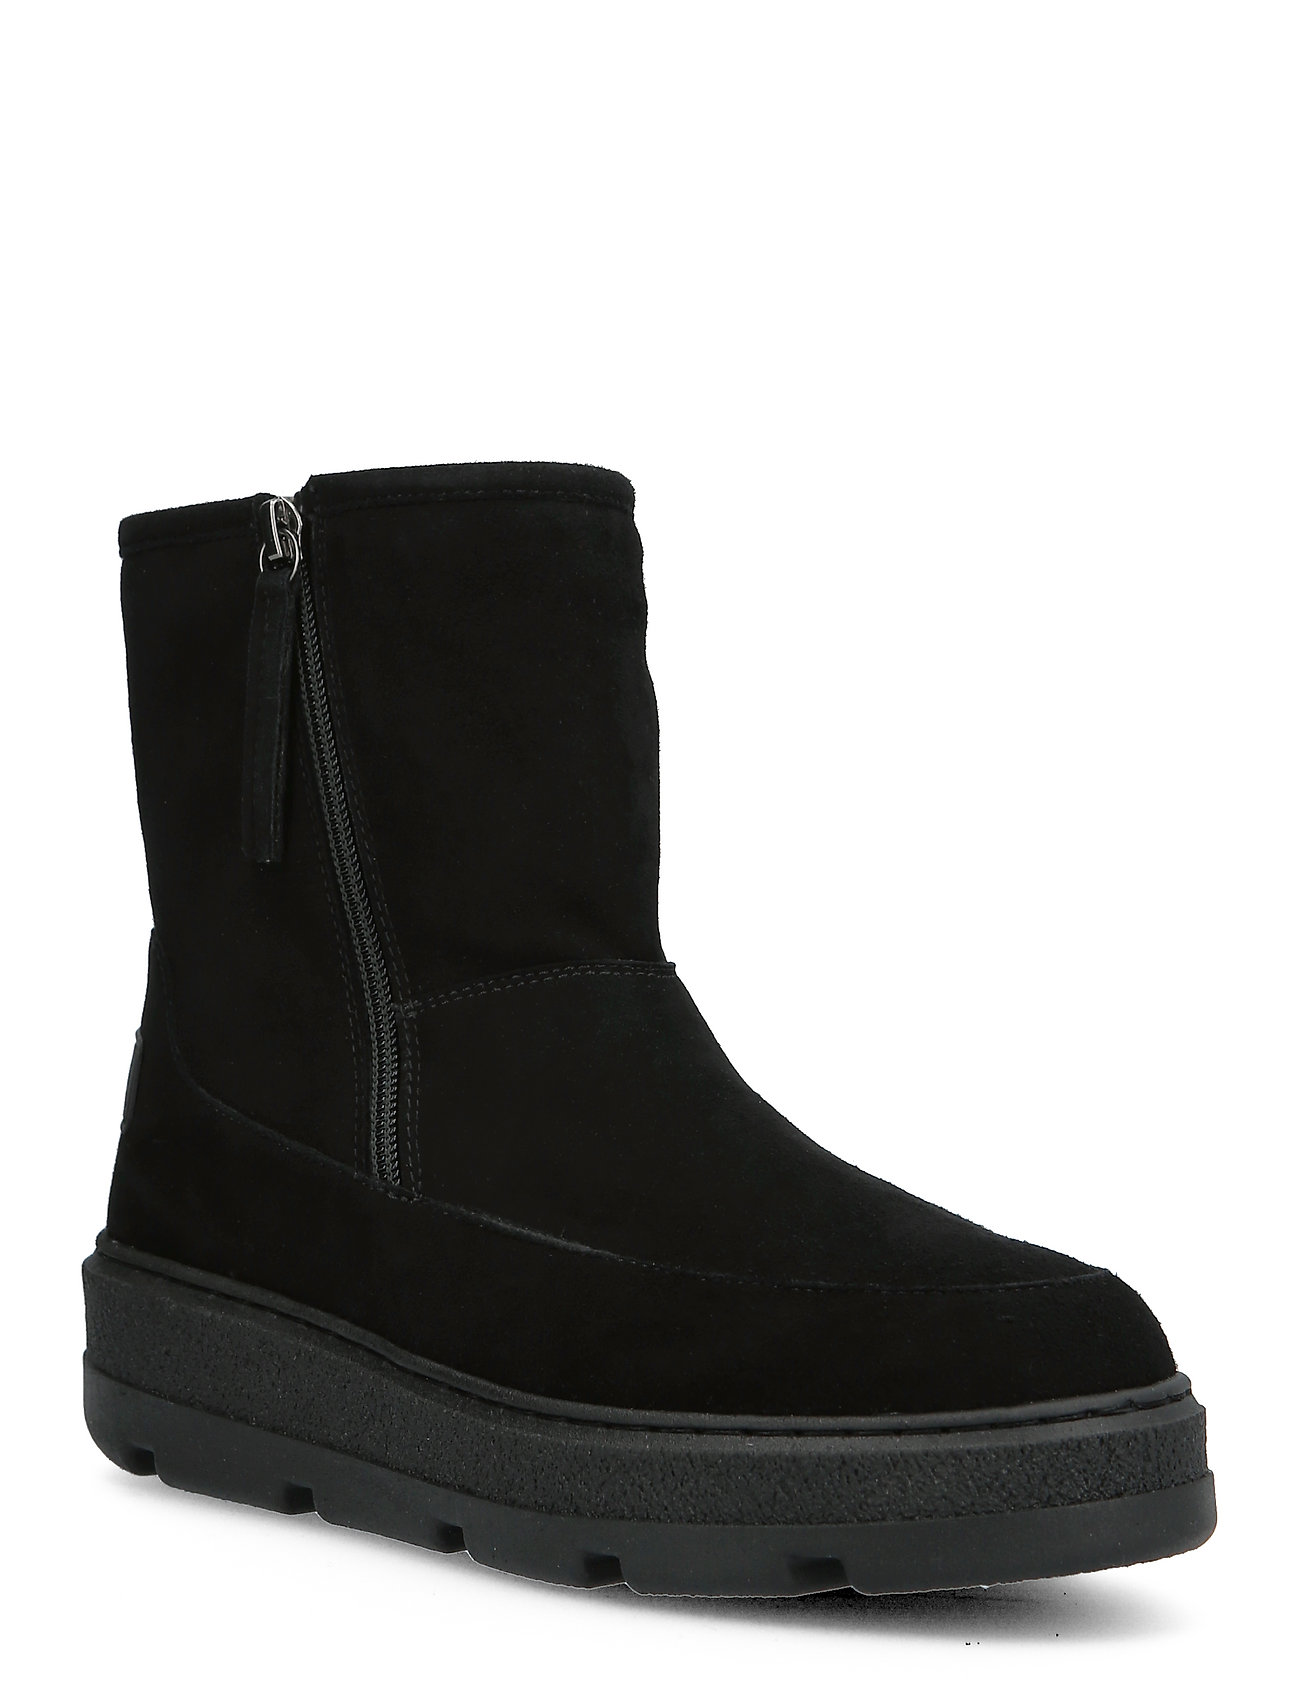 Fraco_bs Shoes Boots Ankle Boots Ankle Boot - Flat Musta UNISA